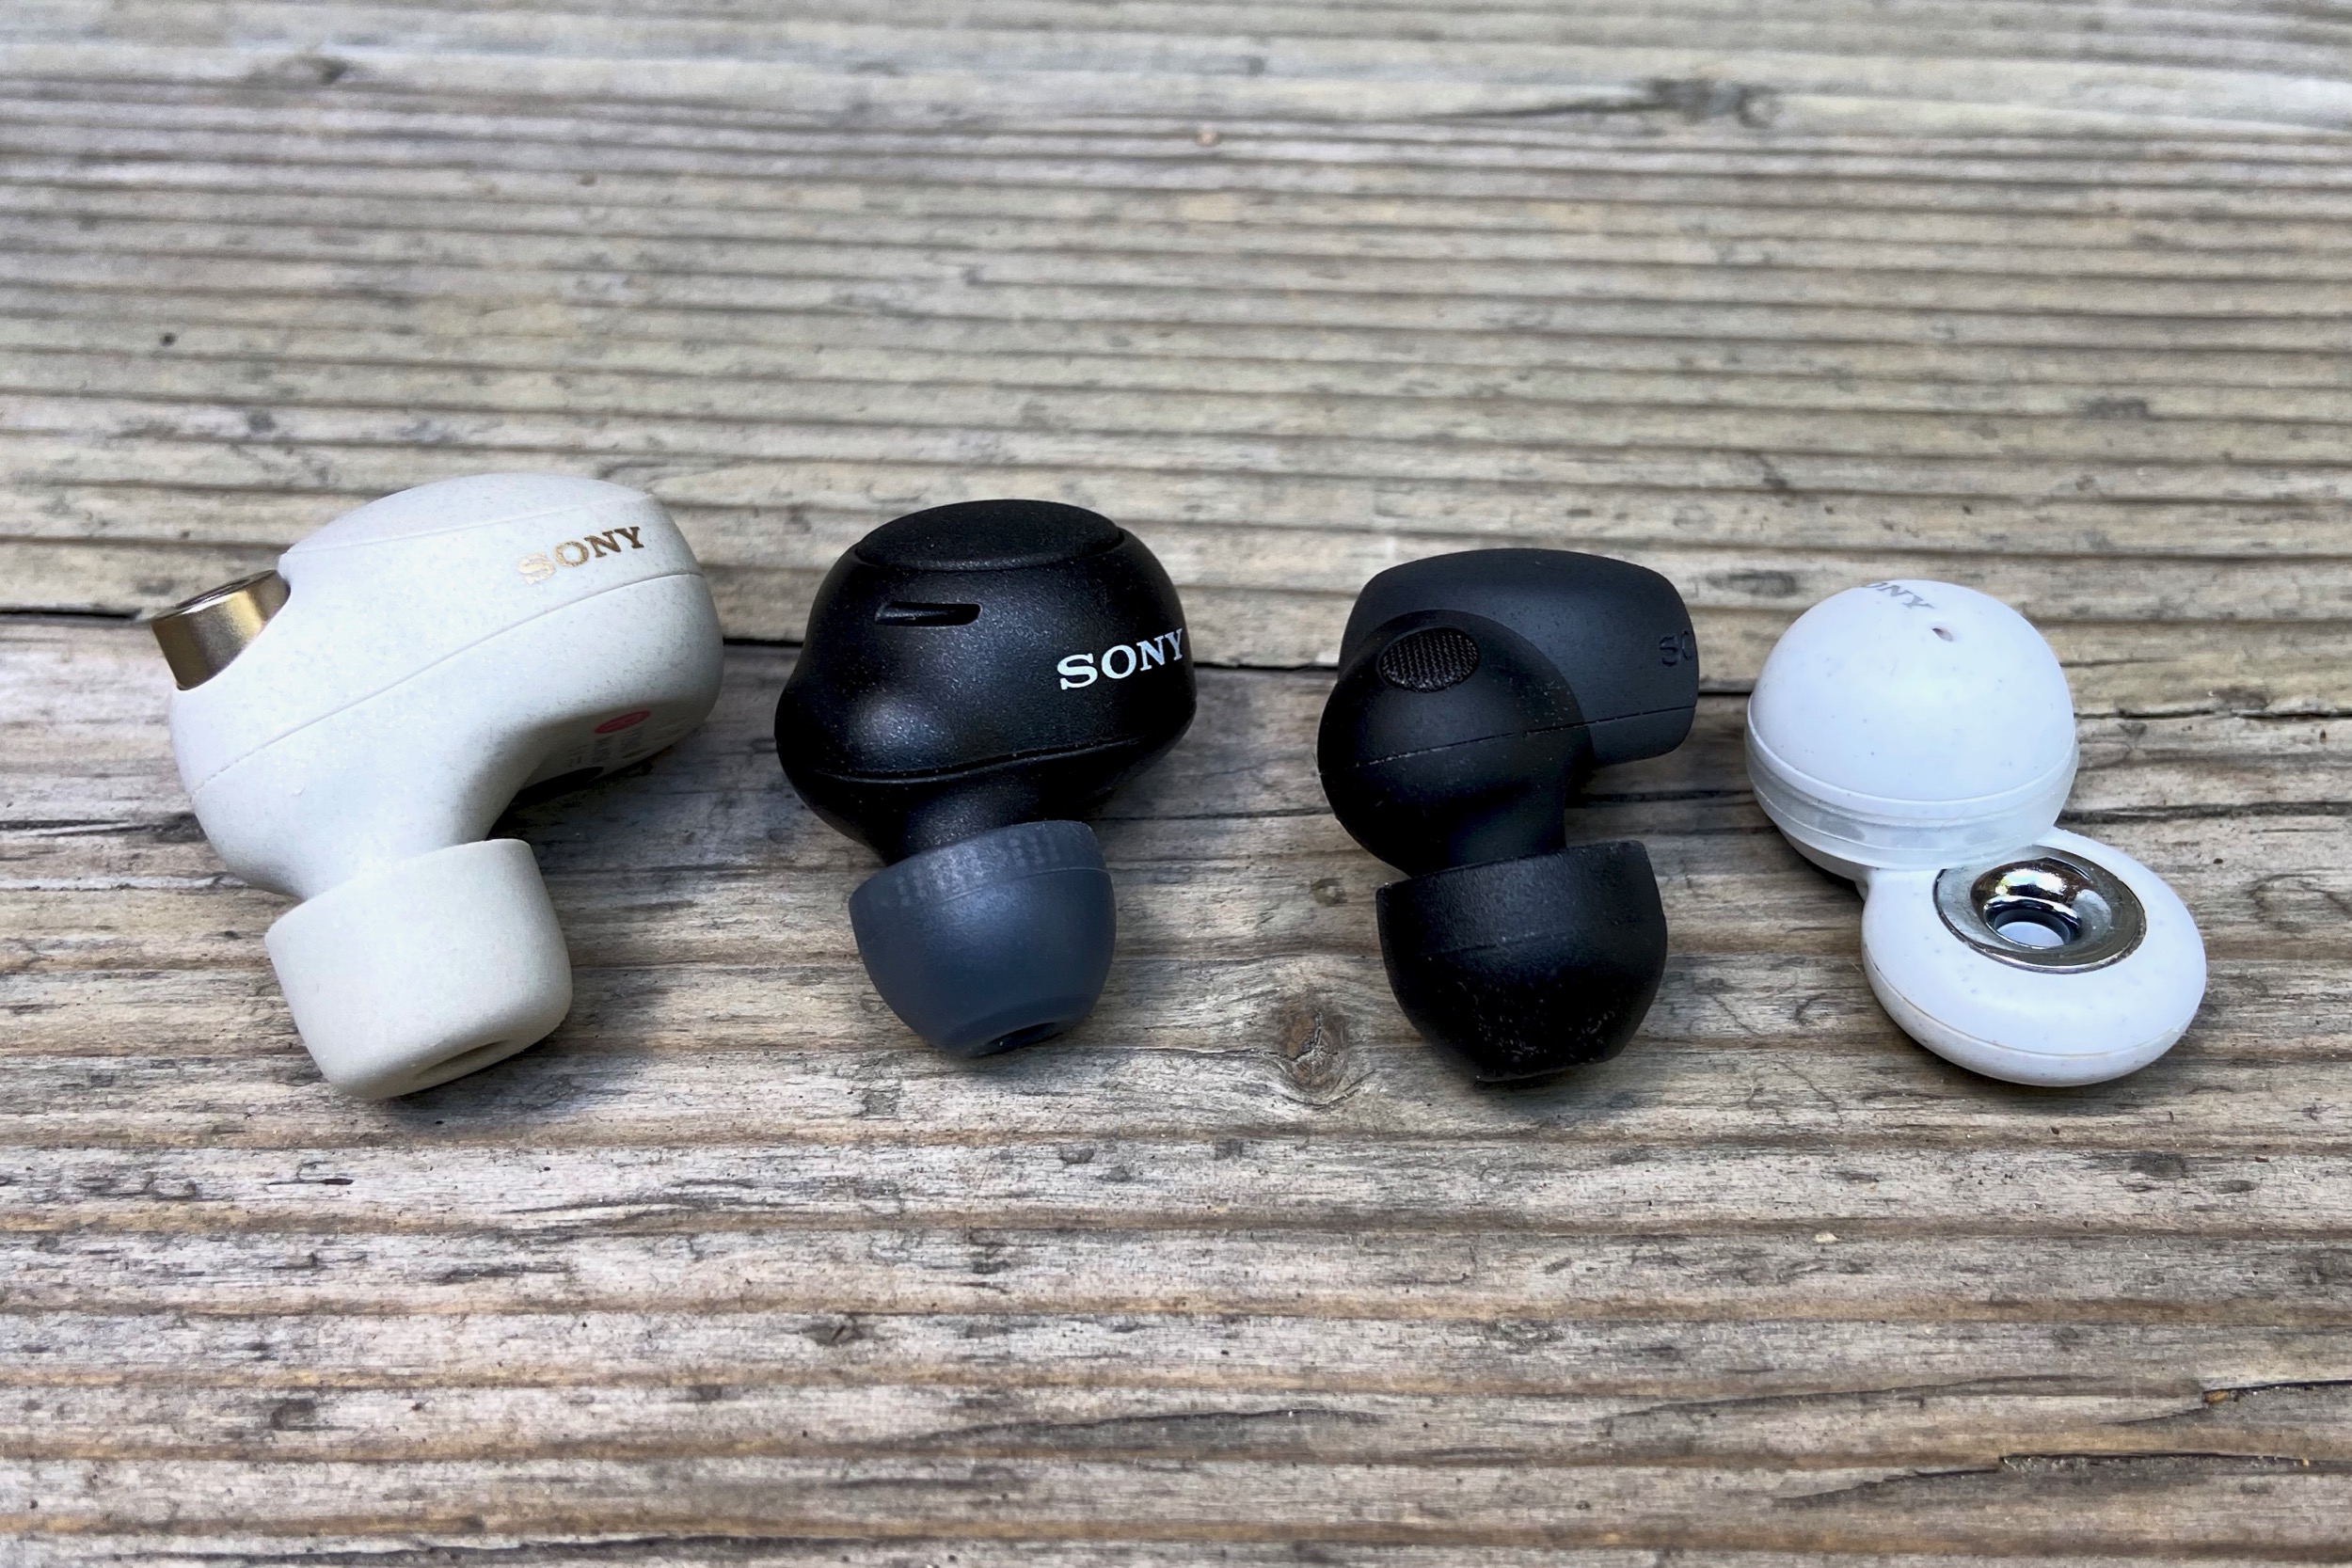 THE DEFINITIVE Sony LINKBUDS S Review & Comparison by an AUDIO ENGINEER 